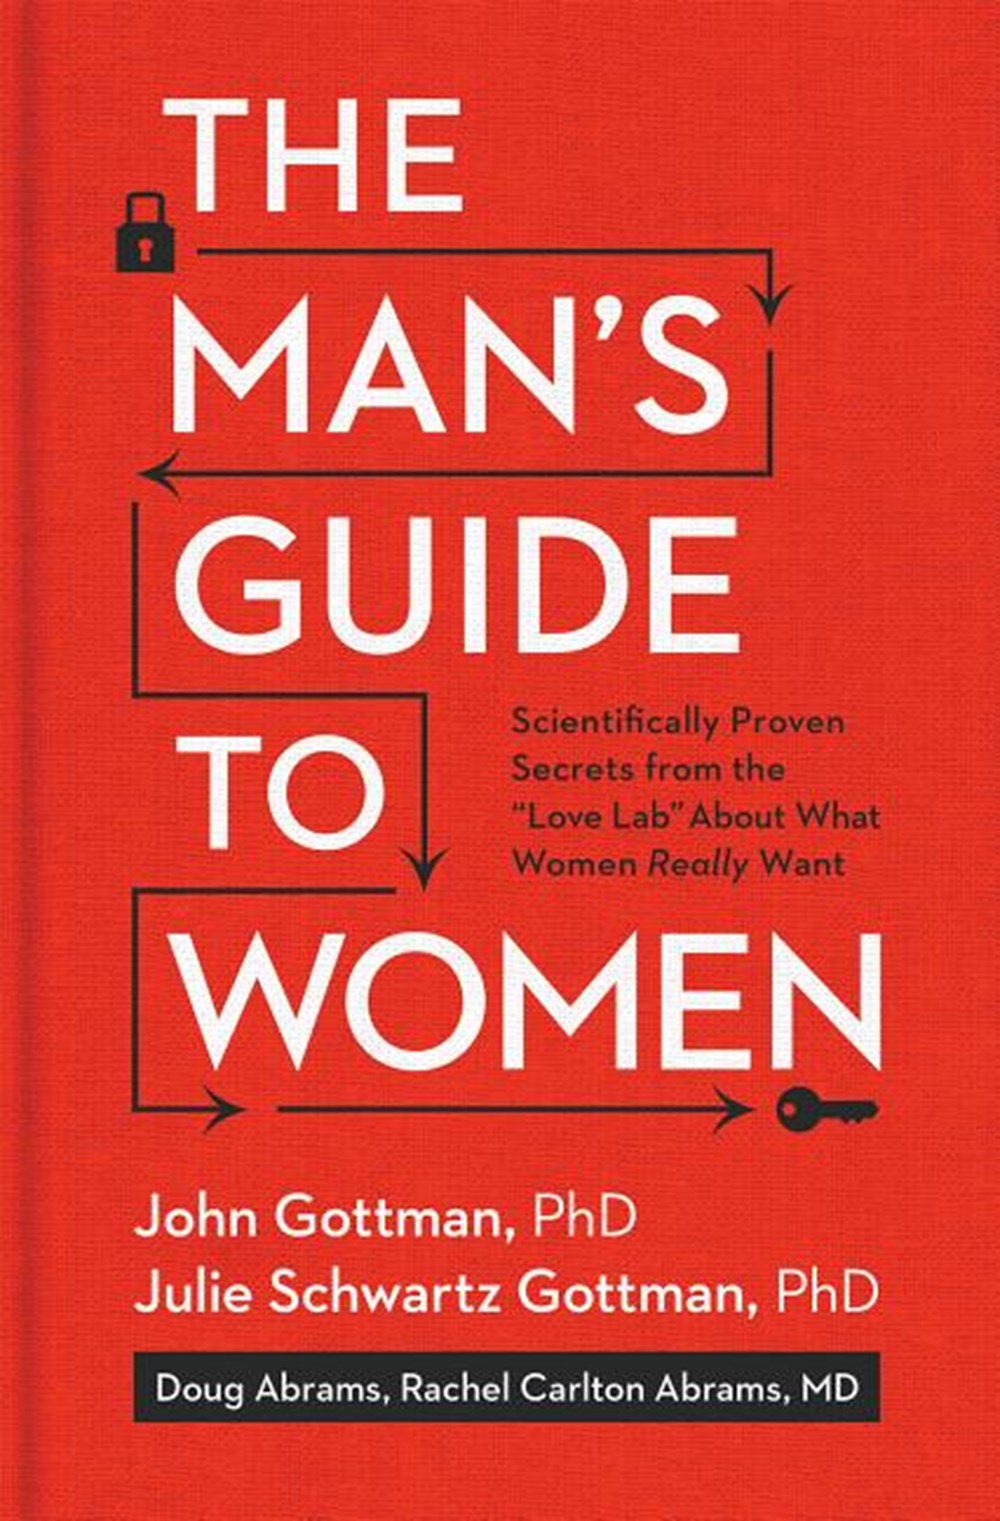 Man's Guide to Women: Scientifically Proven Secrets from the Love Lab about What Women Really Want